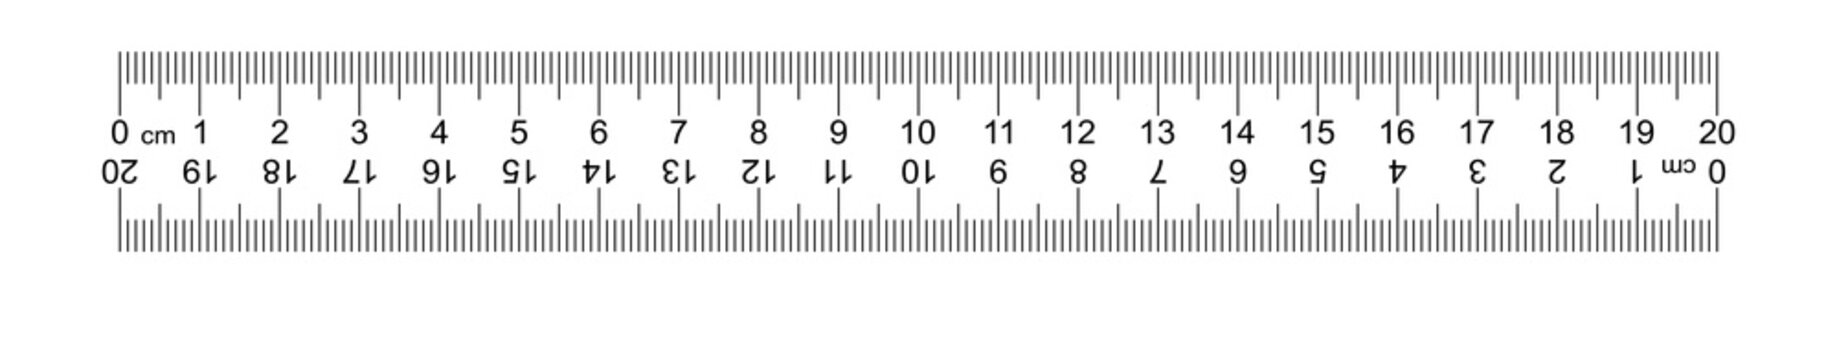 Ruler 20 cm with countdown, doble sided scale. Vice versa backwards, mounting, engineering, designer, tailor ruler Measuring tool. Ruler grid 20 cm. Size indicator units. Metric Centimeter size Vector